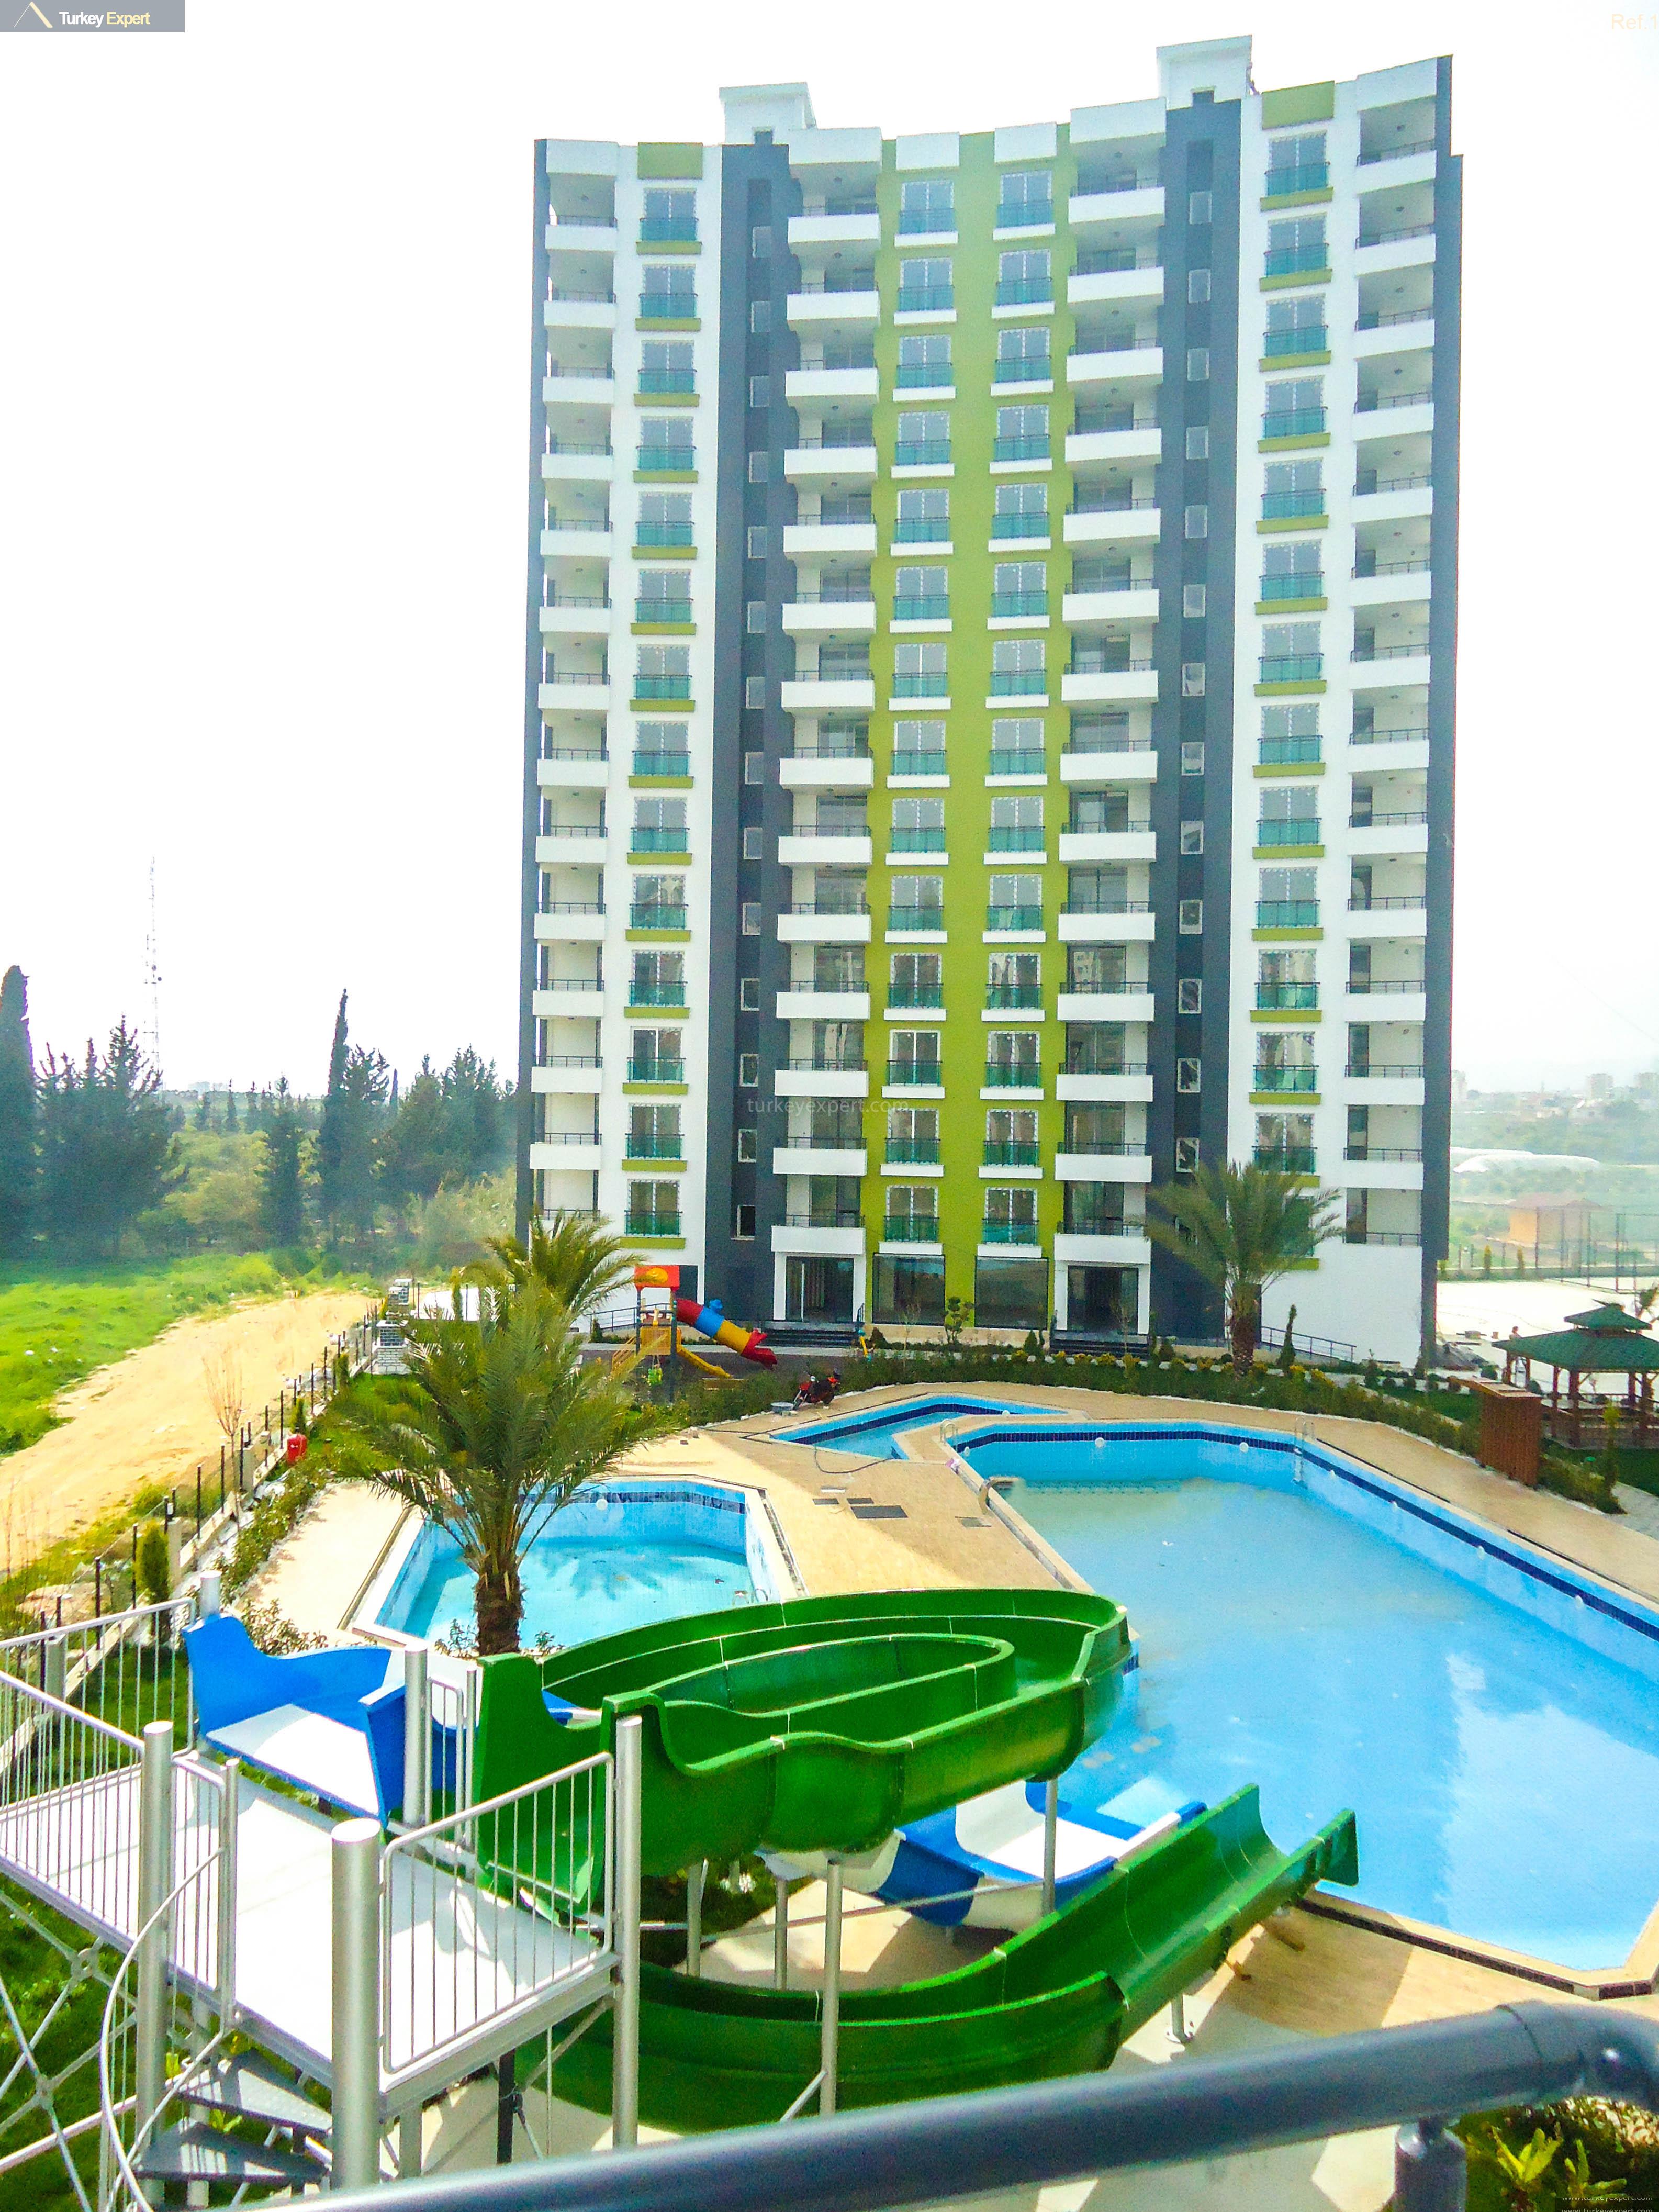 103spacious apartments for sale in a complex in tece mersin.